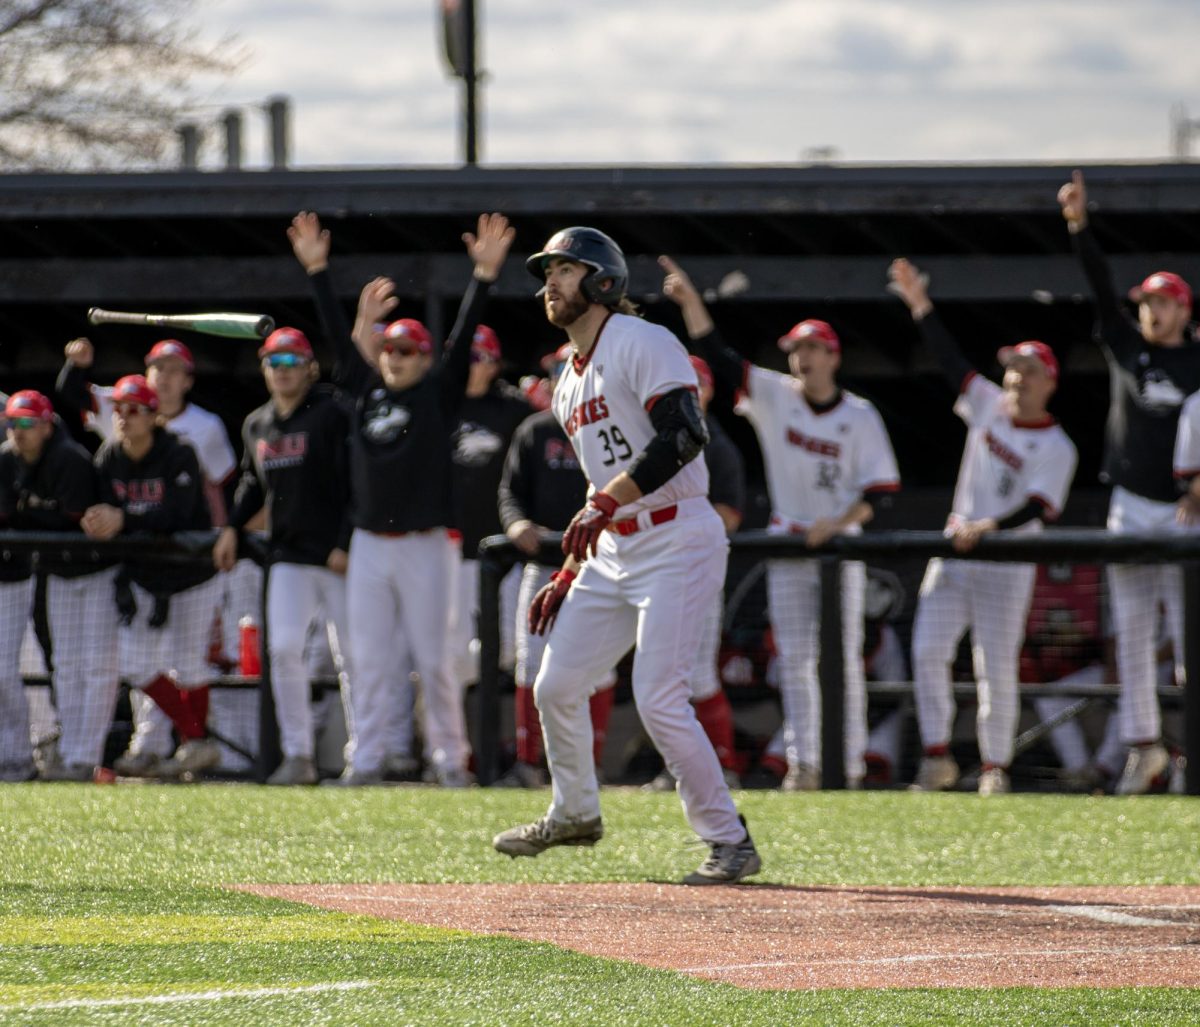 Junior left fielder CJ Cepicky (39) flips his bat after hitting a two-run home run to left field during the fourth inning against Bowling Green. Cepicky’s home run cut the Falcons lead to 4-3. (Tim Dodge | Northern Star)